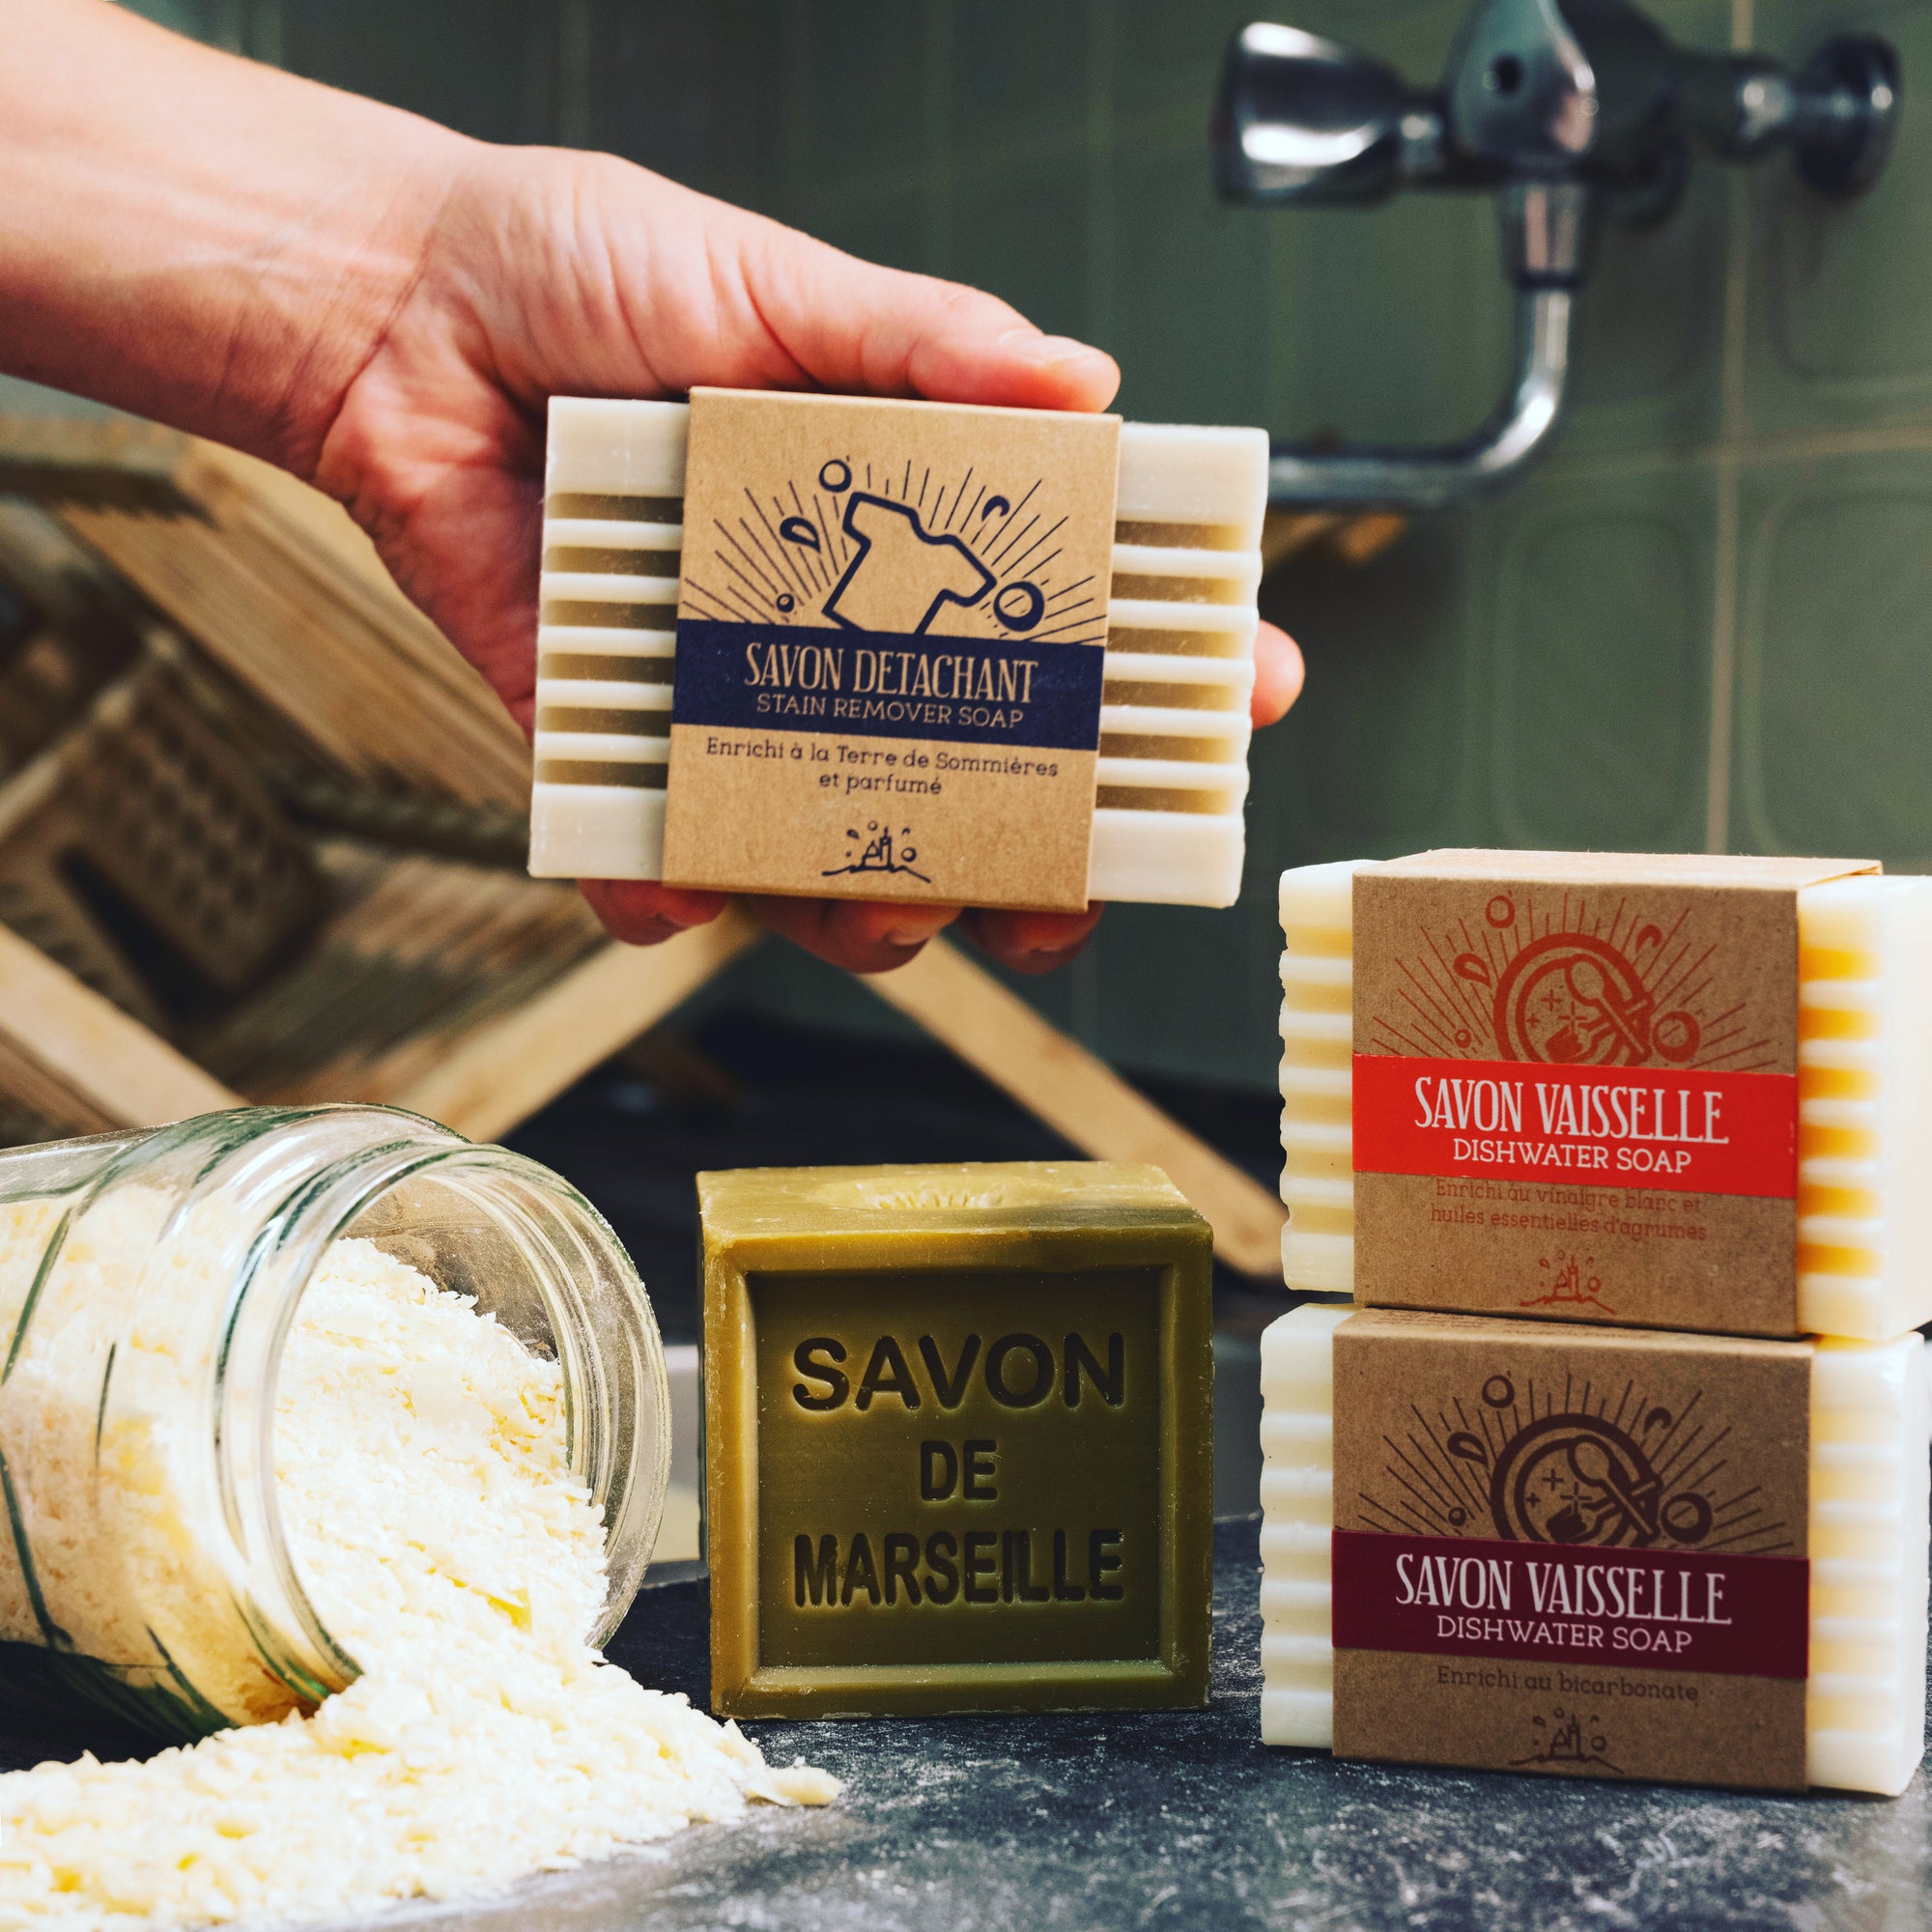 Discover Savon De Marseille Household Soap & Reduce your cost of living